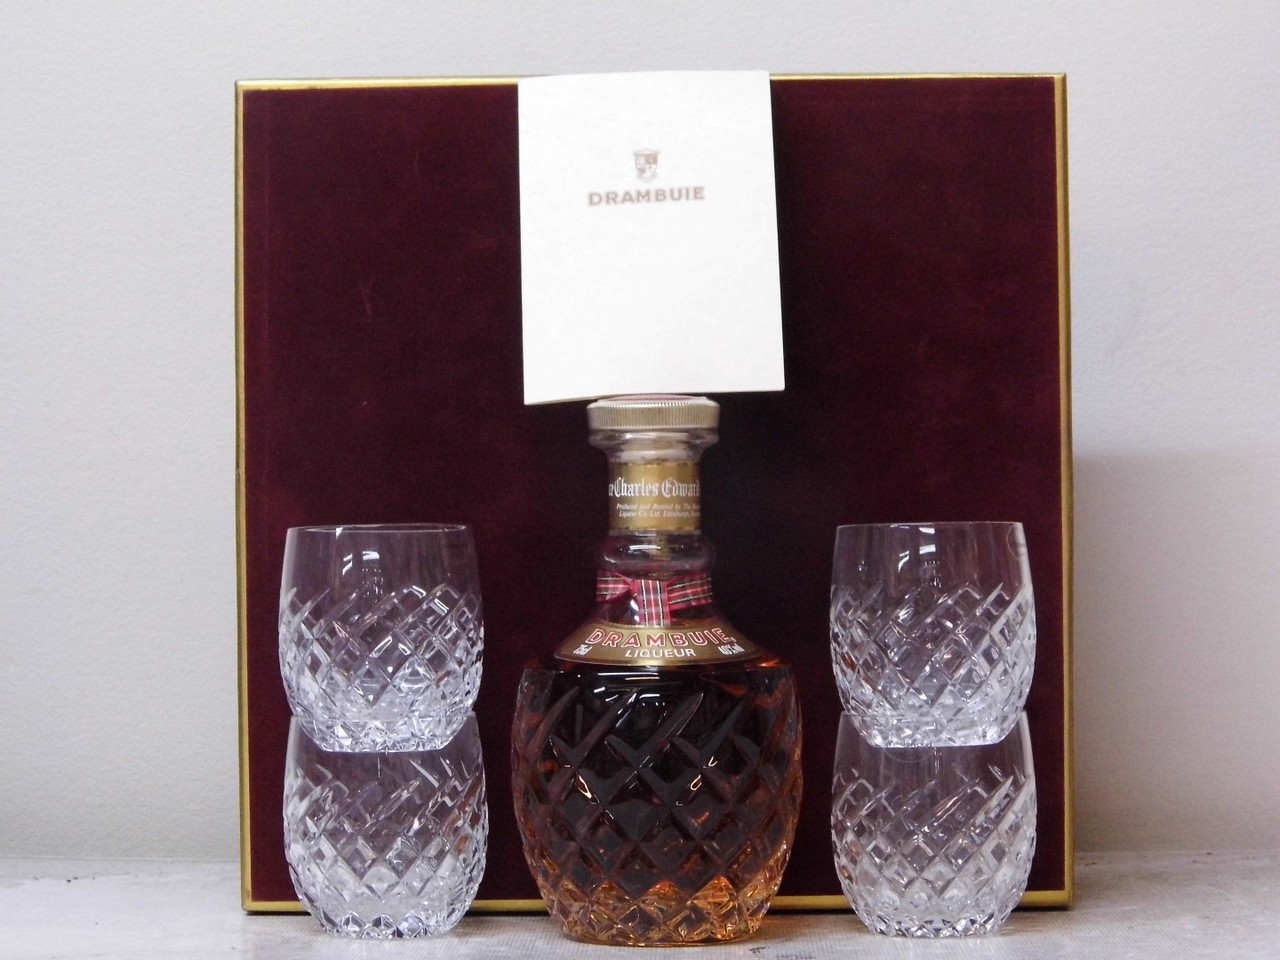 Drambuie Wedgewood Decanter SetSet 161/50075cl 40% Vol1 bt In Presentation Box to include decanter